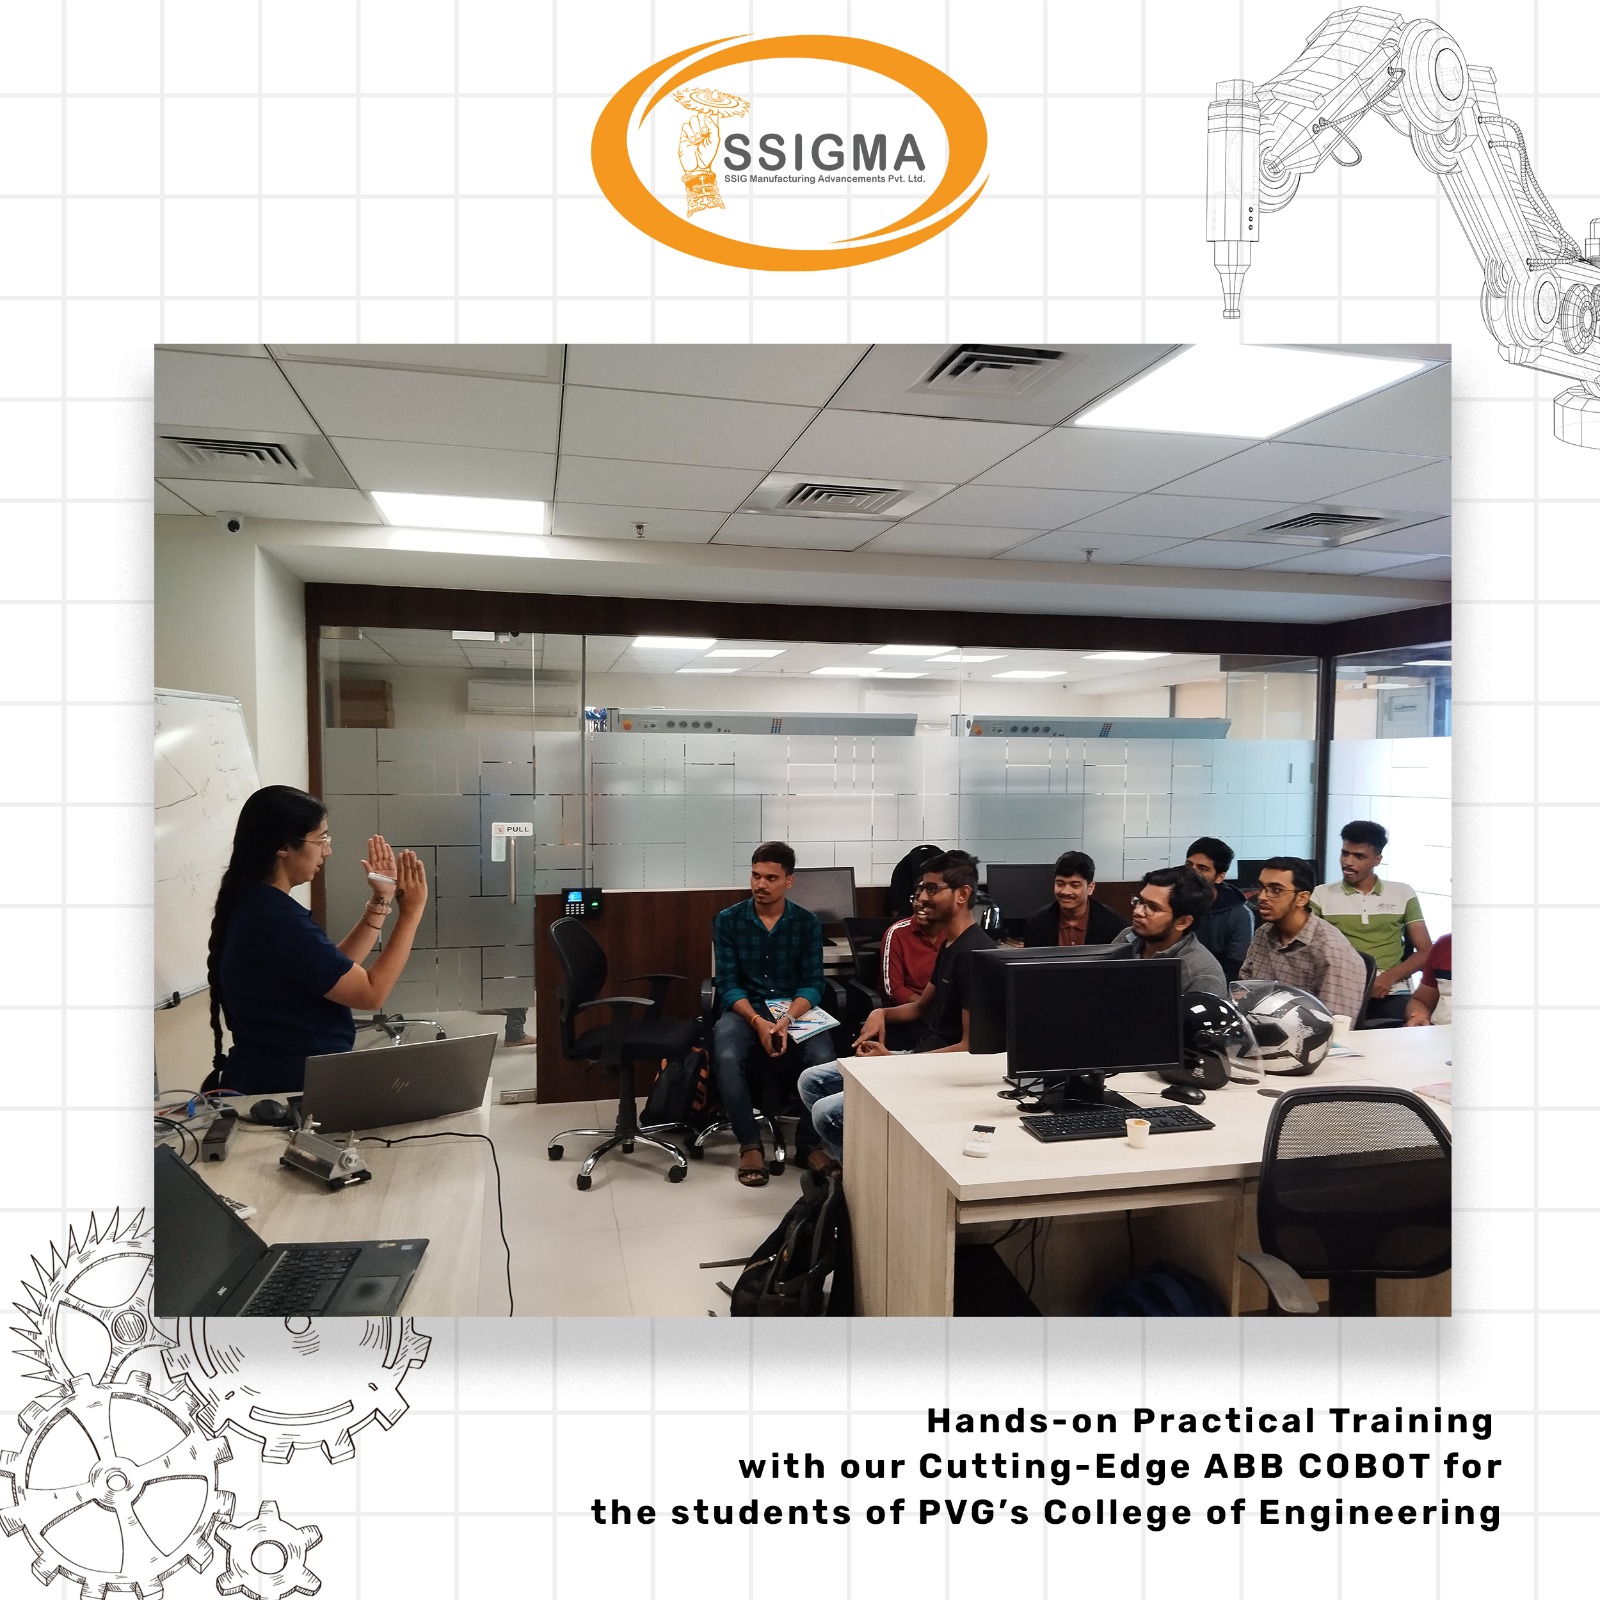 ssigma-hand-on-industrial-training